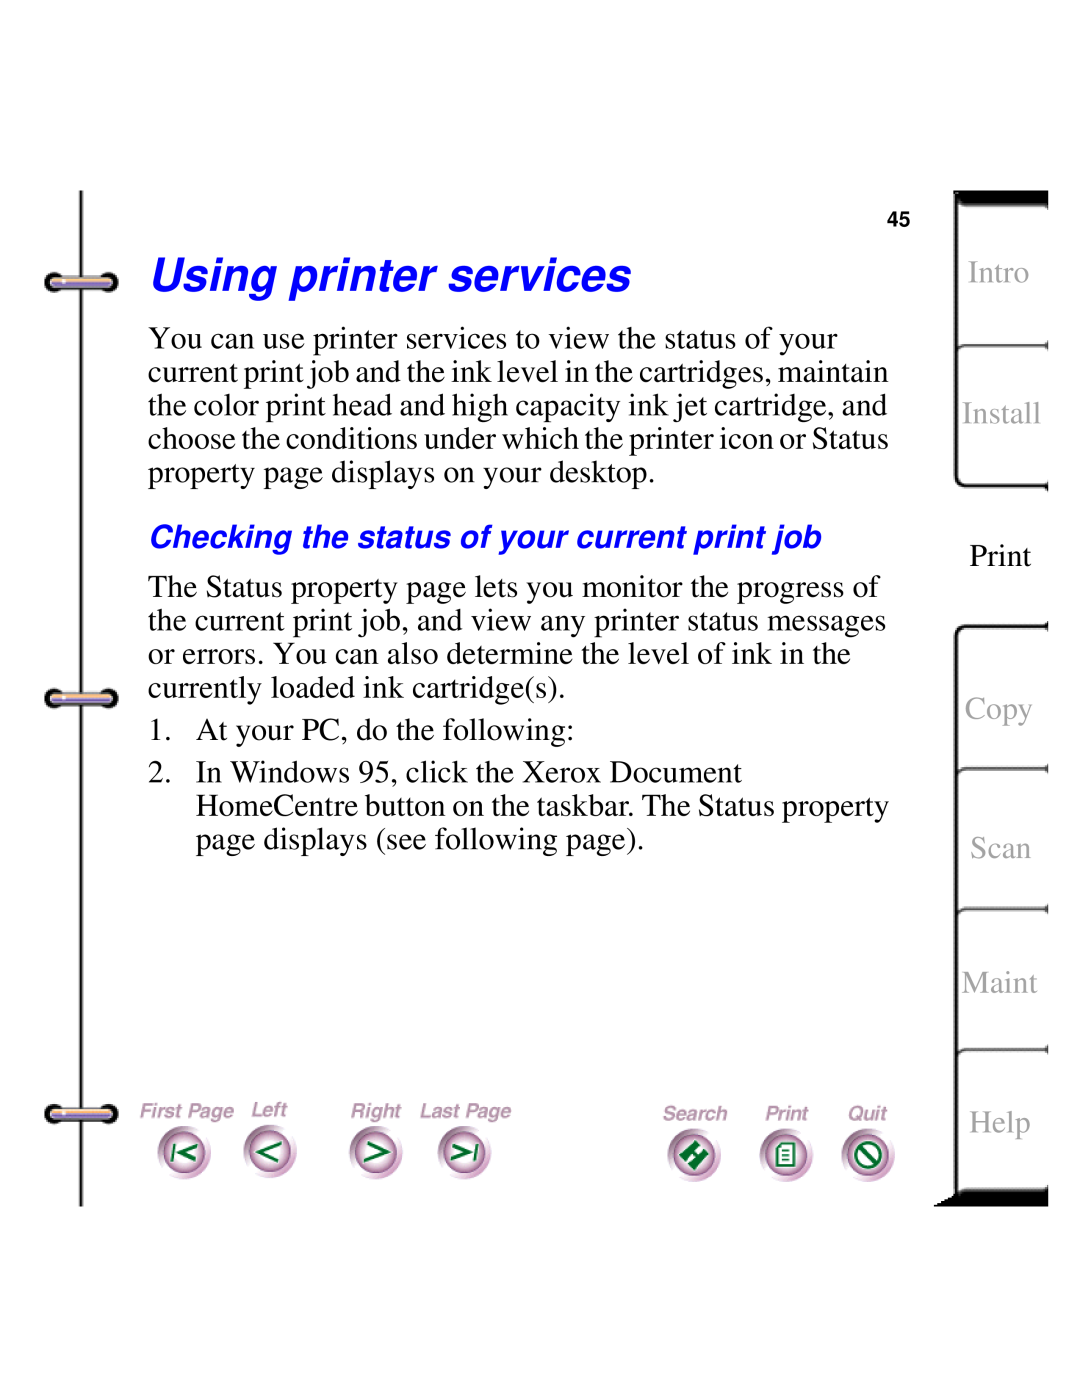 Xerox Document HomeCentre Using printer services, Checking the status of your current print job, Intro Install, Copy Scan 